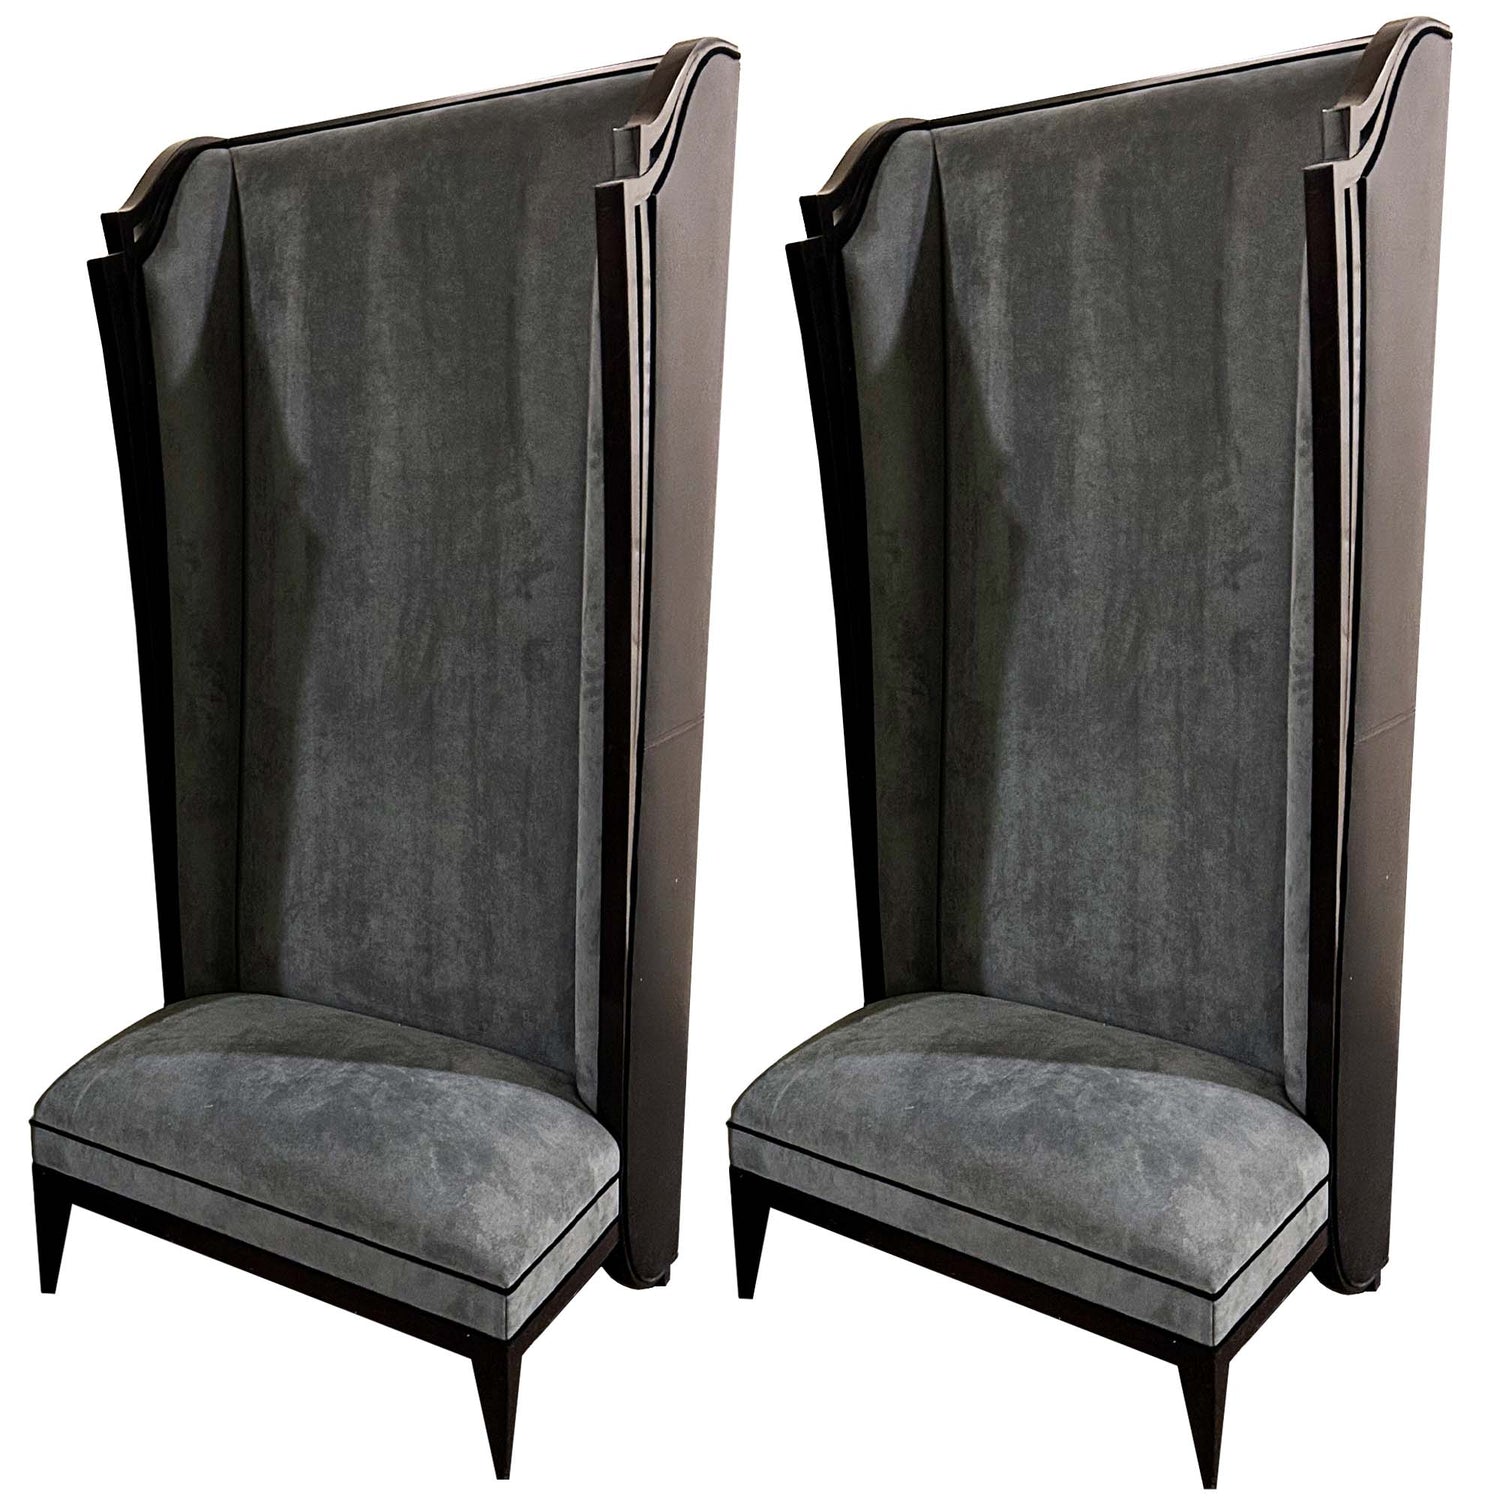 Christopher Guy Chair - Set of Two Side